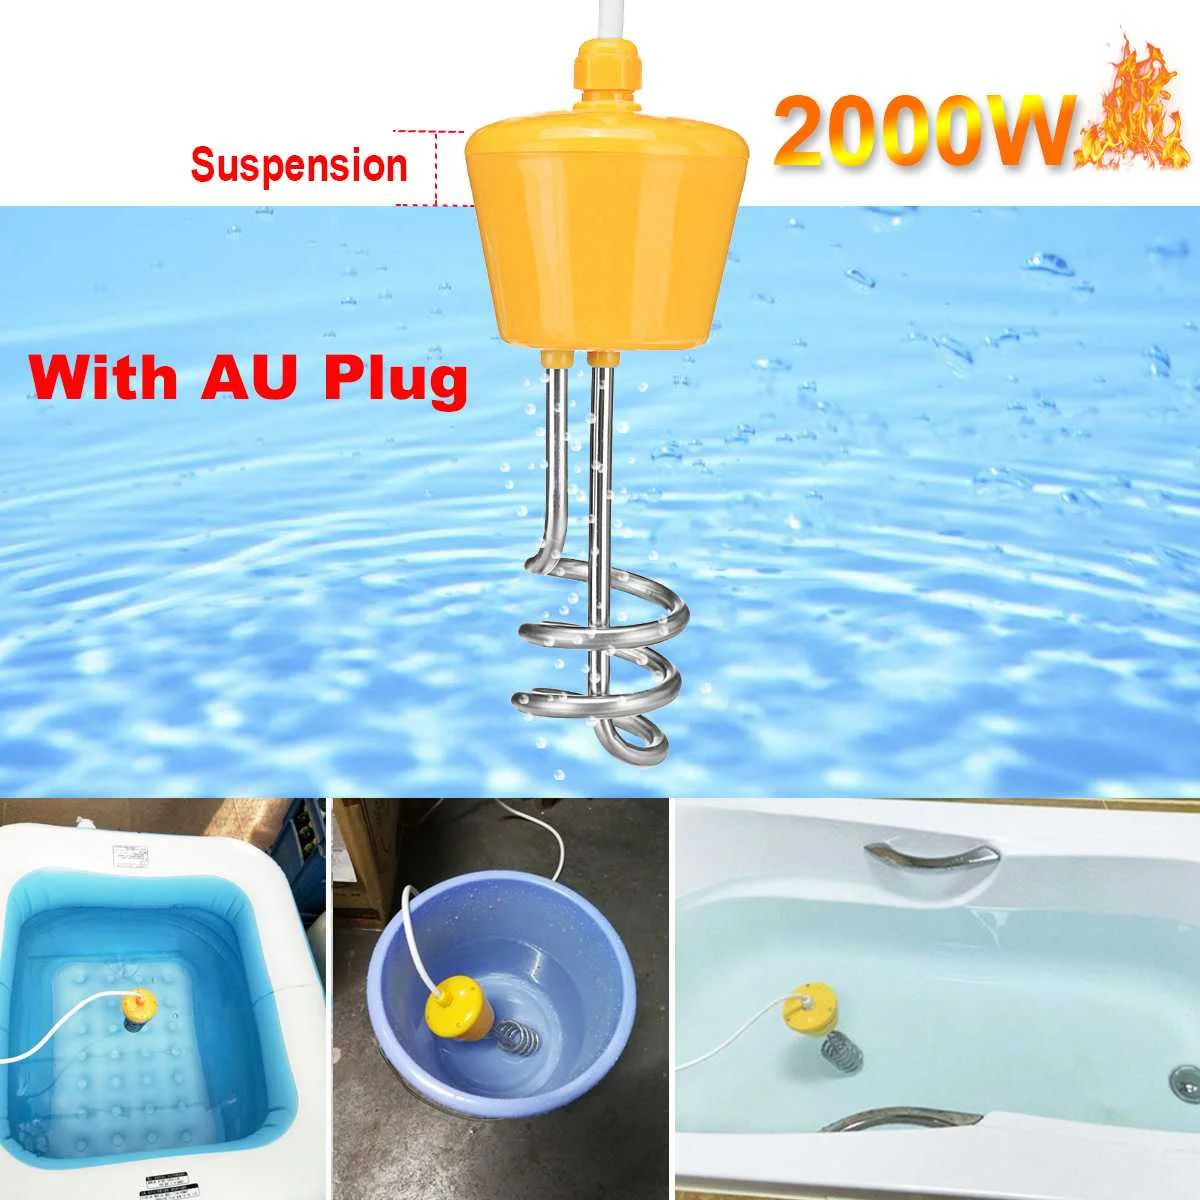 

2000W 220V Portable Suspension Stainless Steel Electric Floating Immersion Heater Boiler Water Heating Element For Bathroom